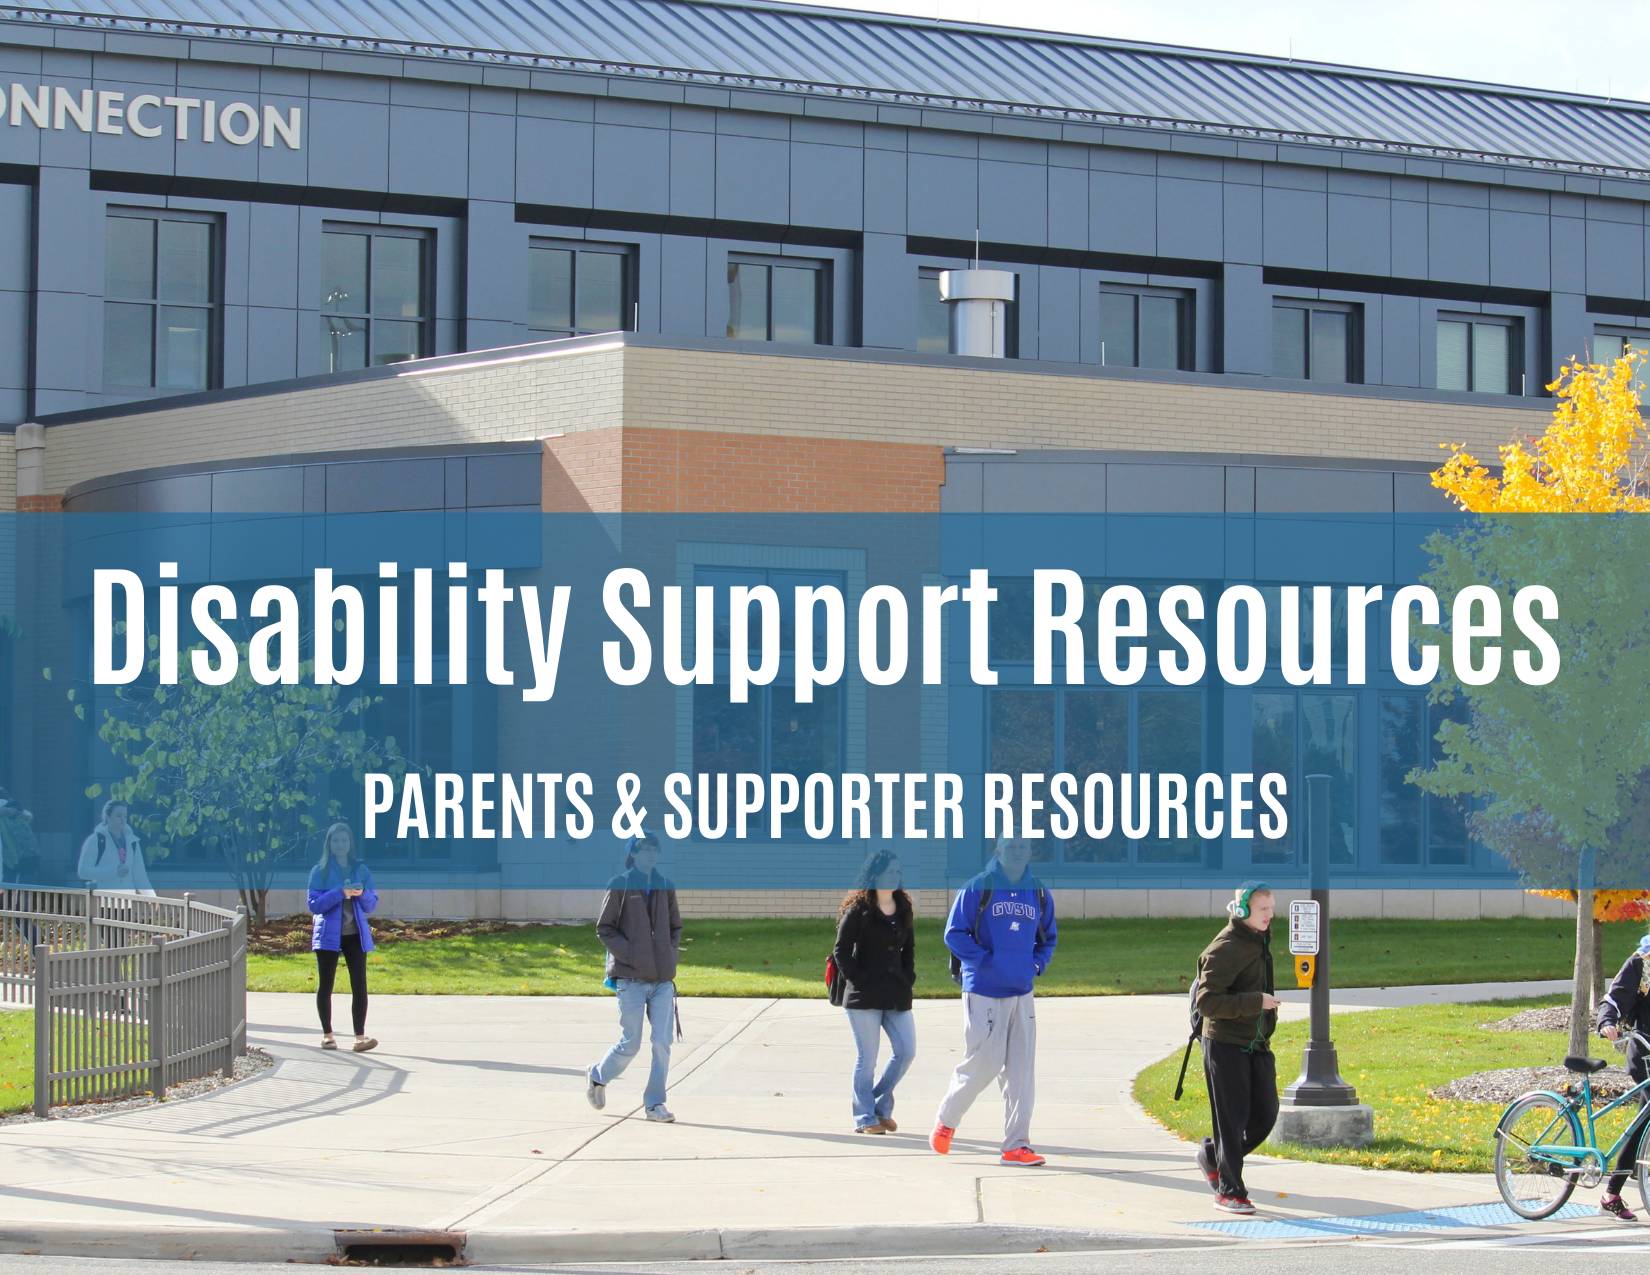 Disability Support Resources, Parent and Supporter Resources